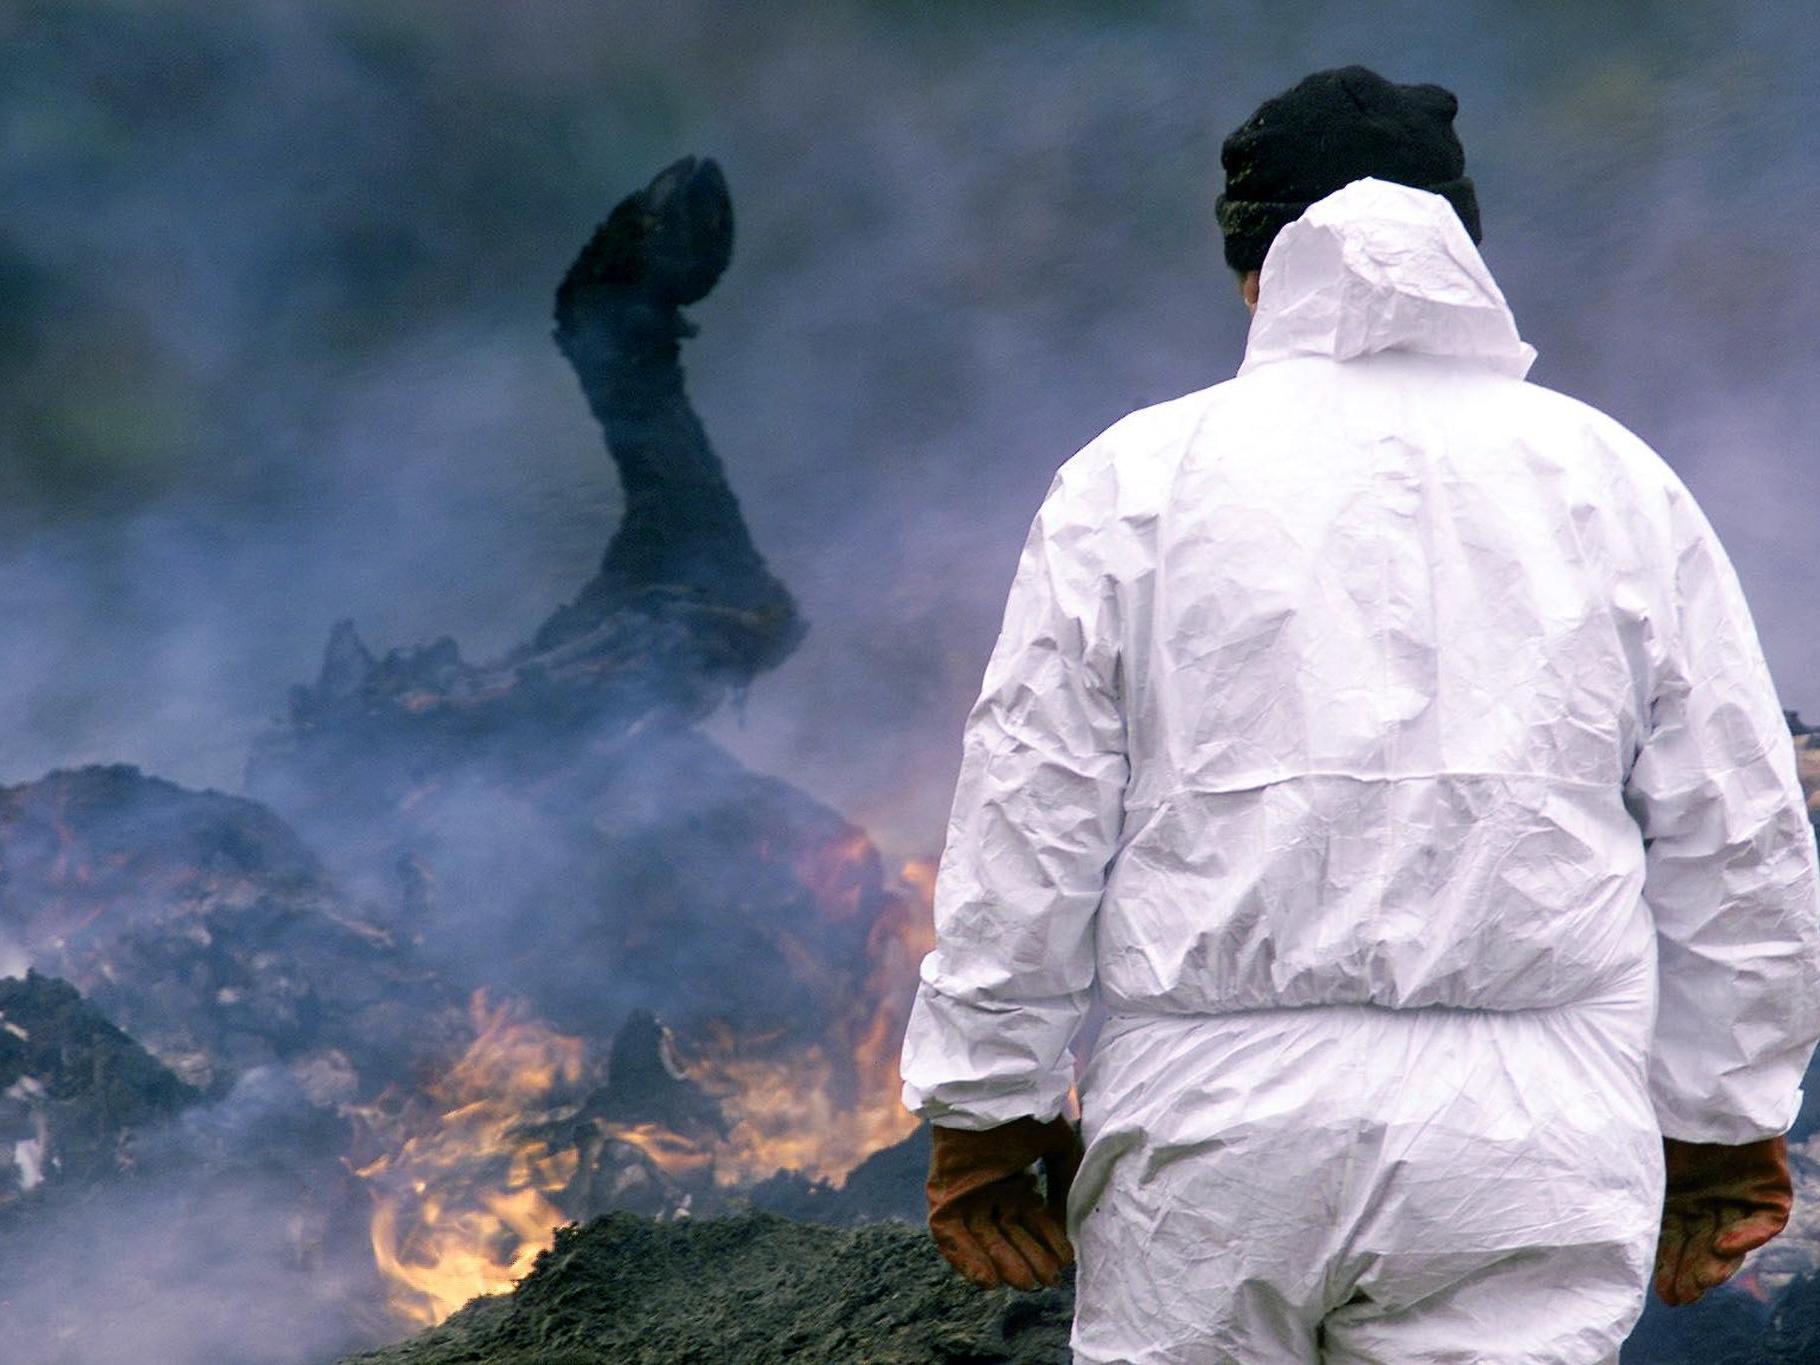 A government official supervises as funeral pyres burn at a farm in Dartmoor, March 2001